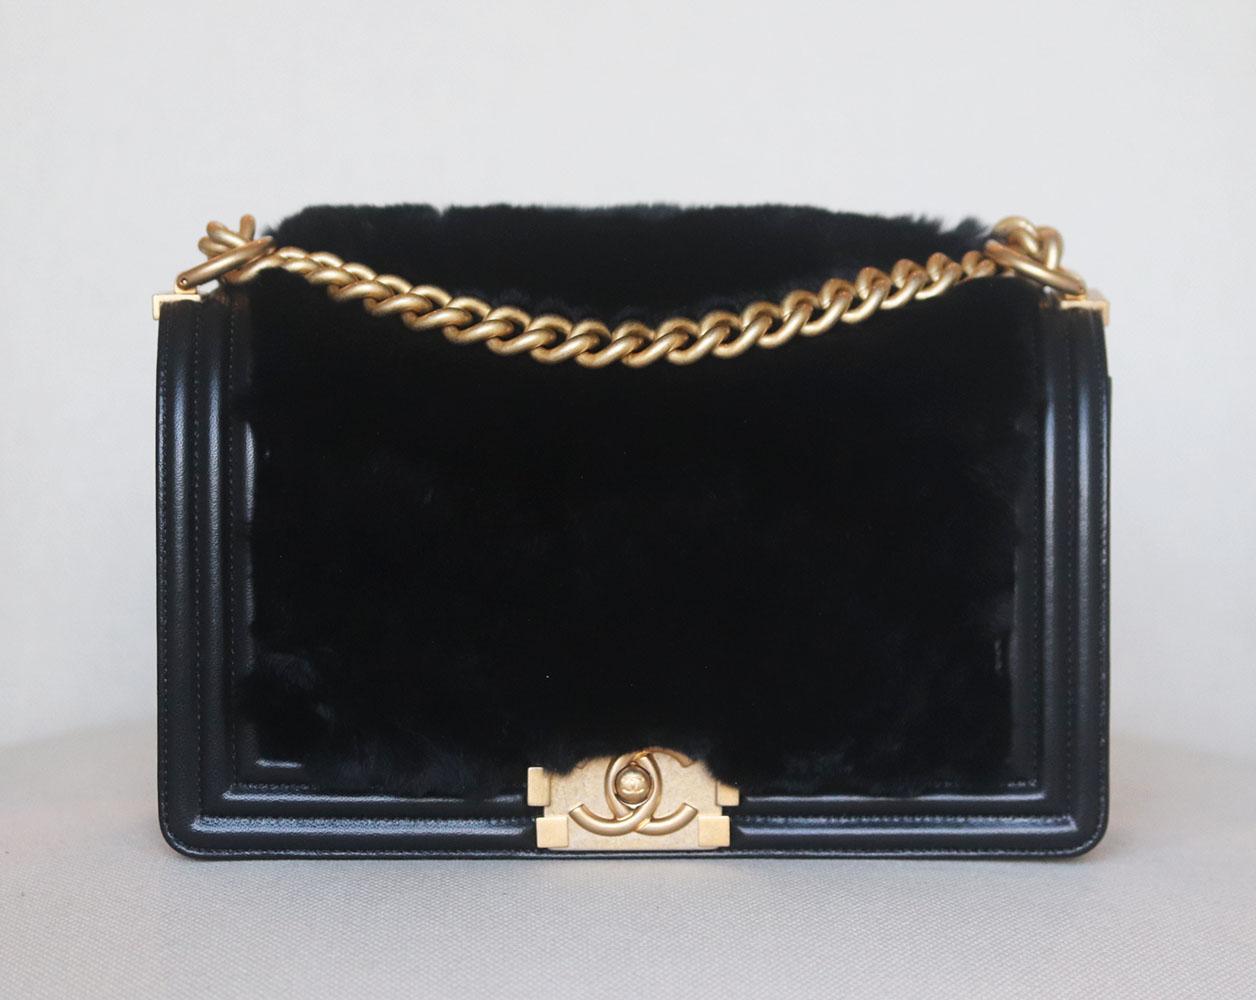 Chanel Rabbit Fur-Trimmed Lambskin Medium Boy Flap Bag has been hand-finished by skilled artisans in the label's workshop, it is boasting a rabbit-fur and lambskin exterior, this design is accented with antique gold-tone and black lambskin-leather